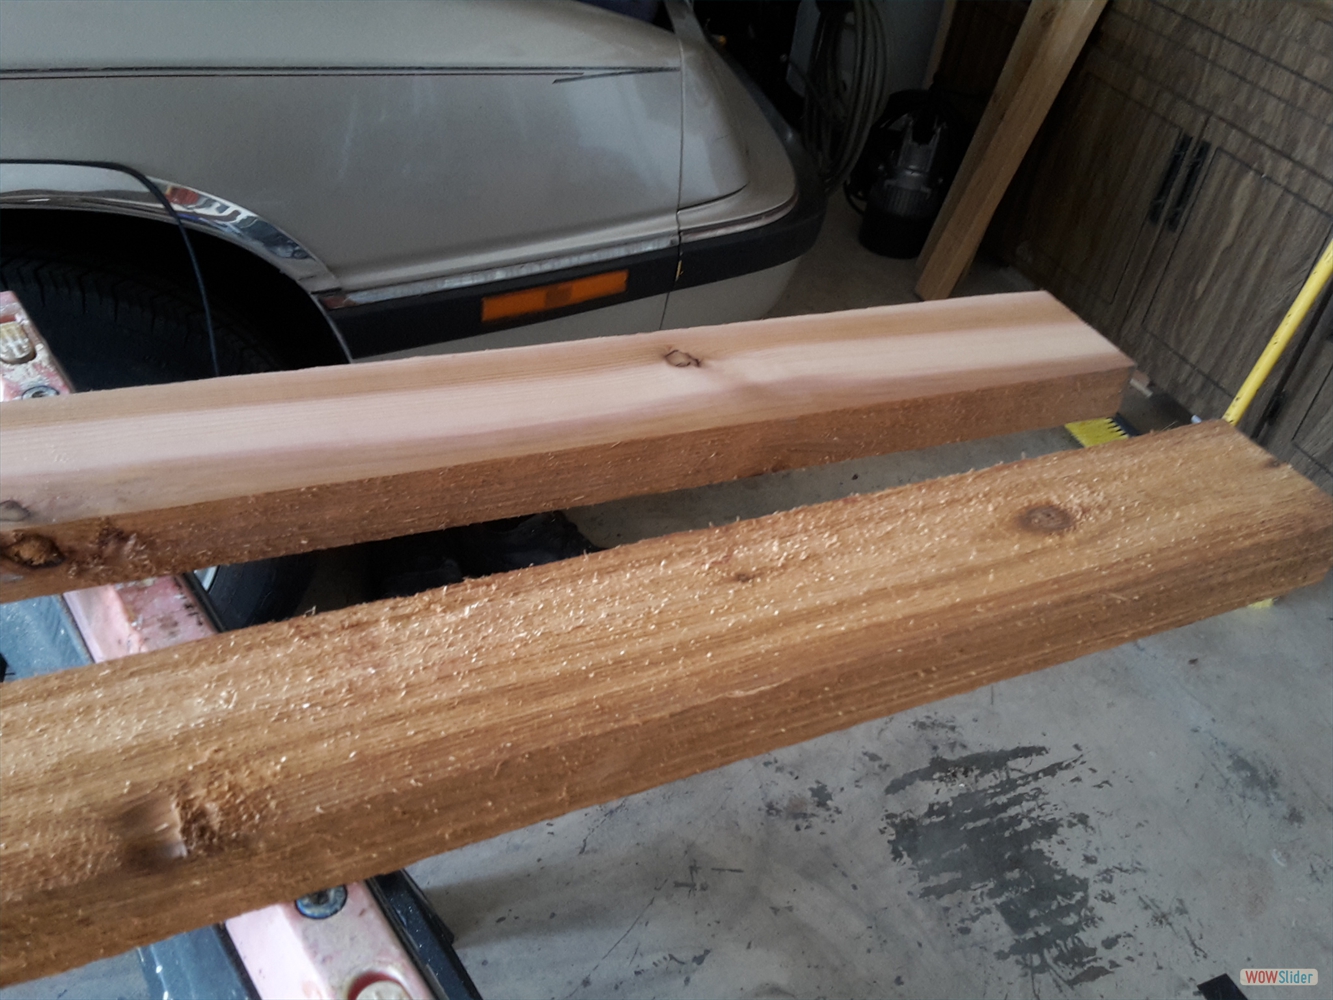 All visible parts are made of Western Cedar wood.